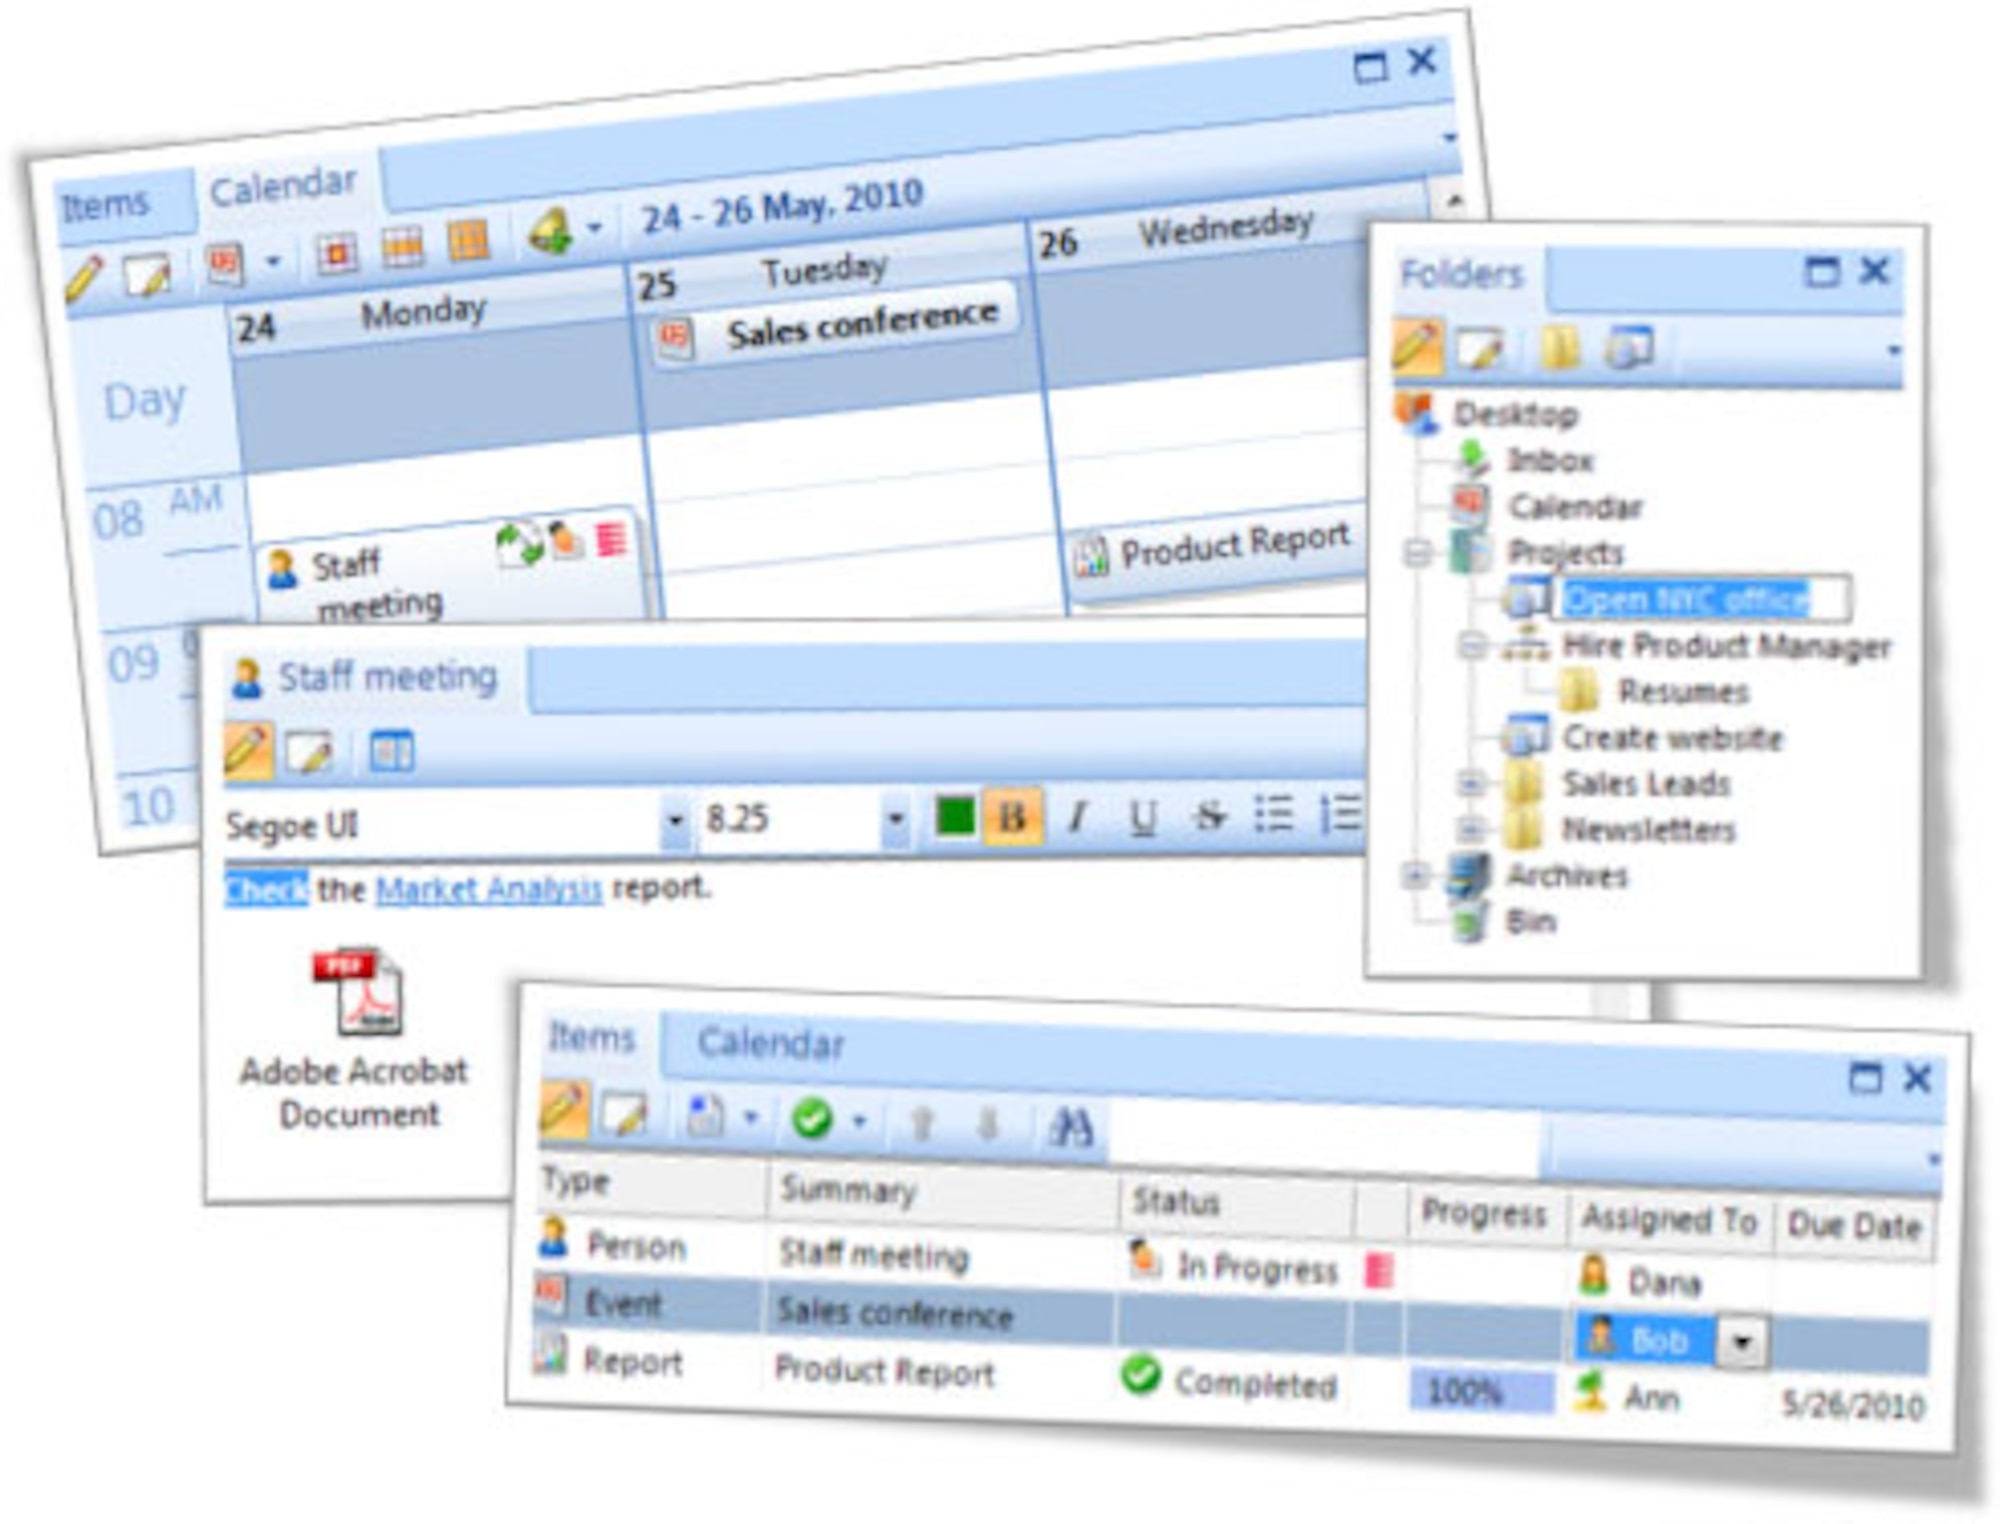 The Outlook integration allows the task creation to work rapidly; with a click of a button, TMT packages an Outlook e-mail, adds a tracking number and allows the initiator to include additional comments and a suspense date, and to select the offices of primary and coordinating responsibilities.